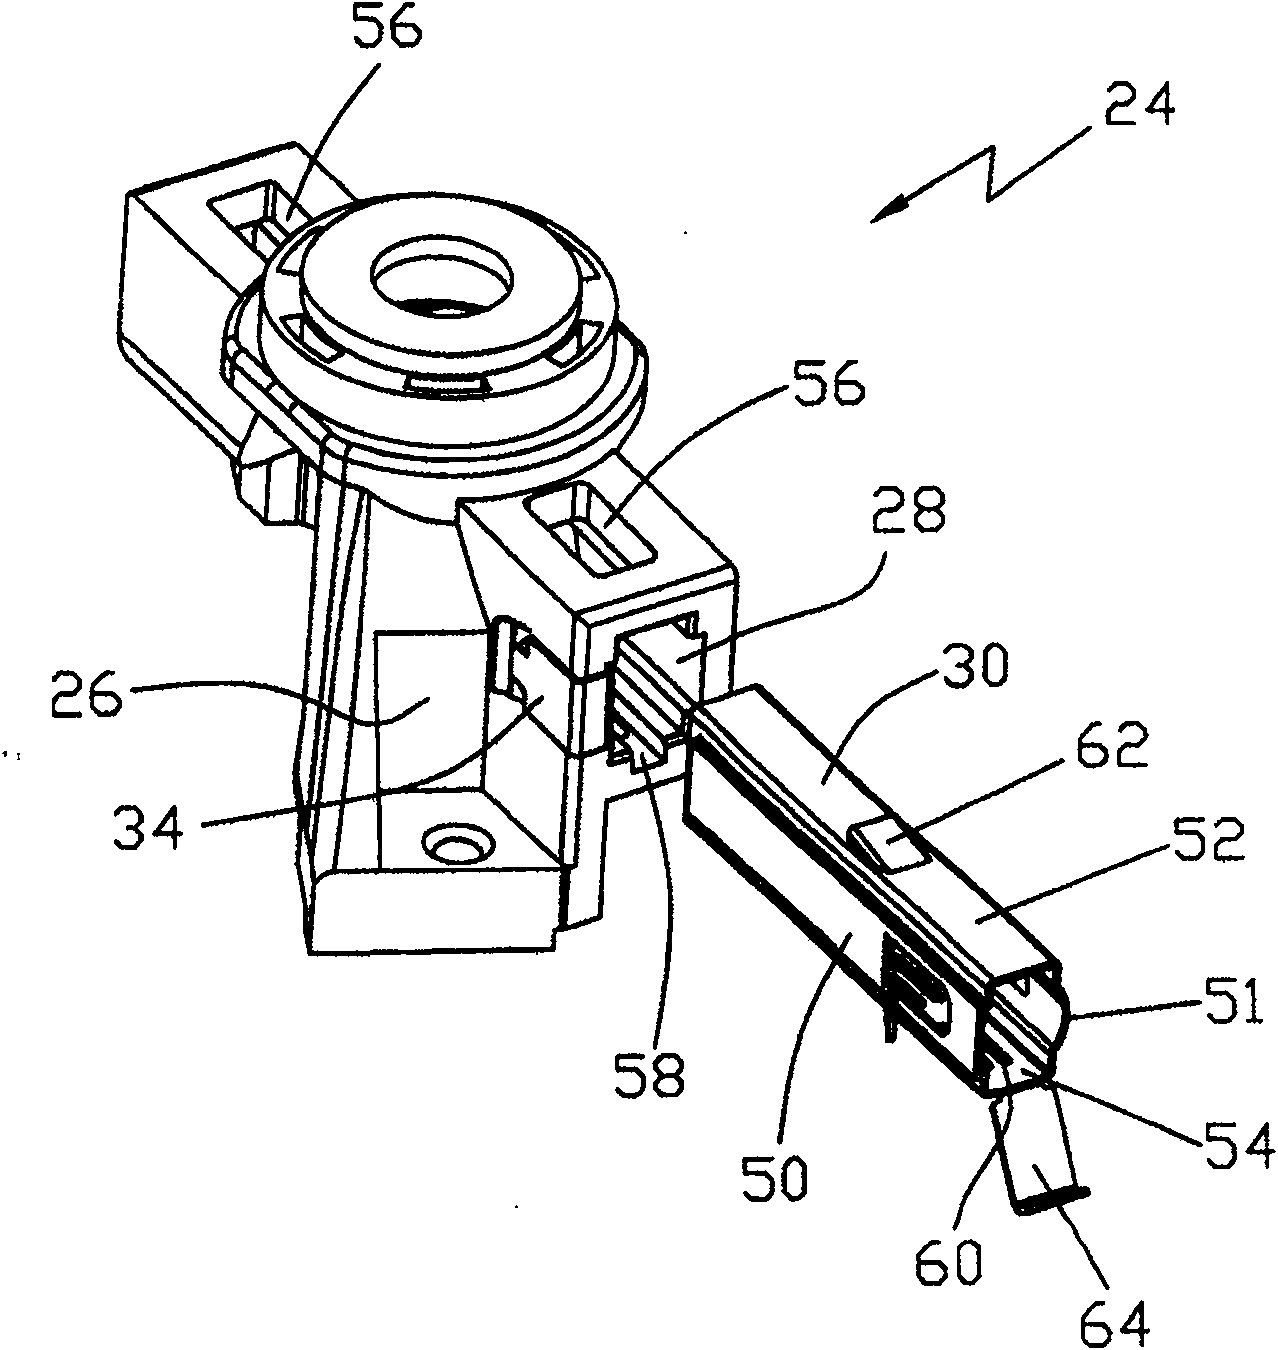 Electric motor with brush holder and its assemblage method